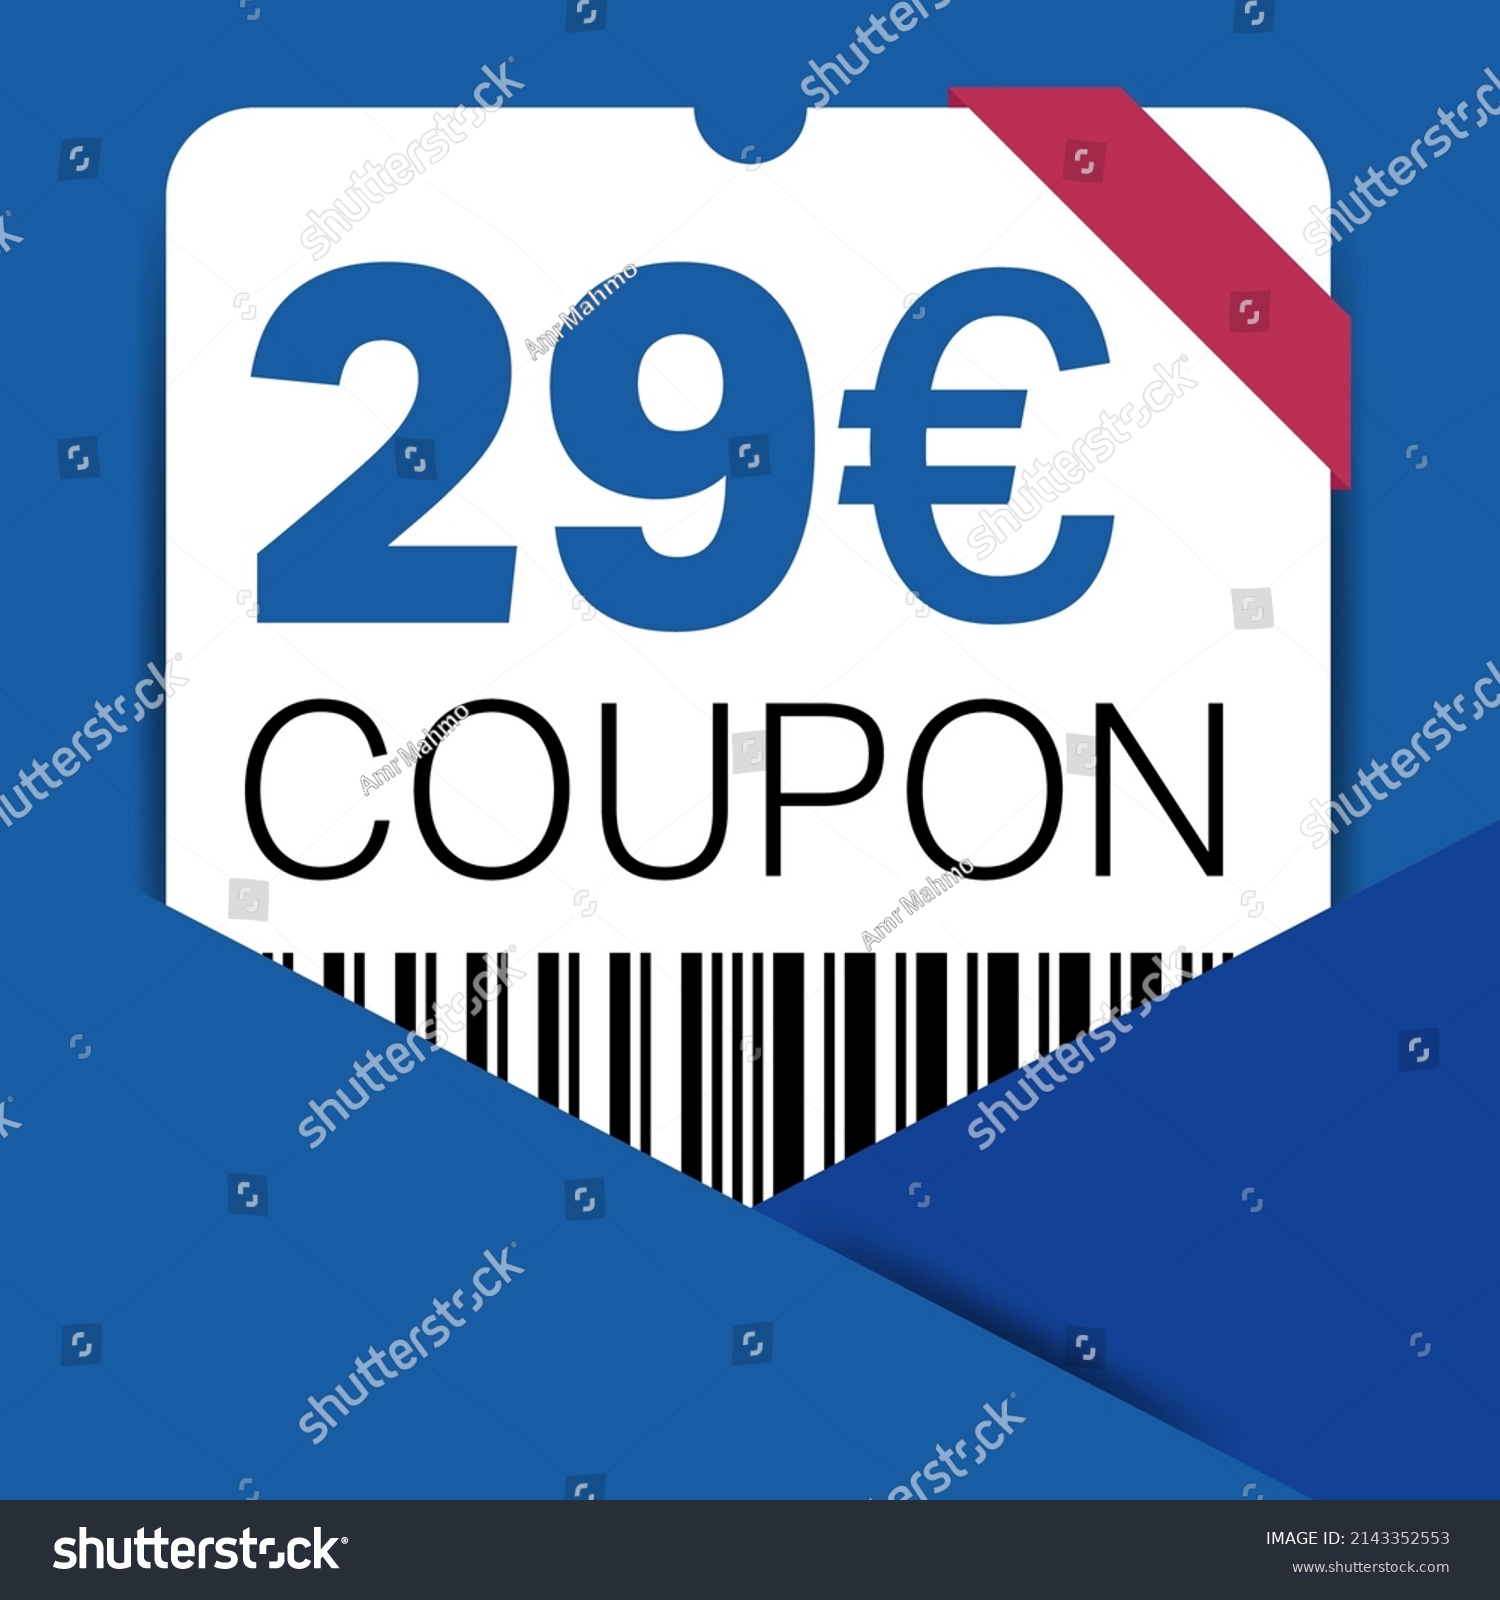 SVG of 29 Euro Coupon promotion sale for a website, internet ads, social media gift 29 off discount voucher. Big sale and super sale coupon discount. Price Tag Mega Coupon discount with vector illustration. svg